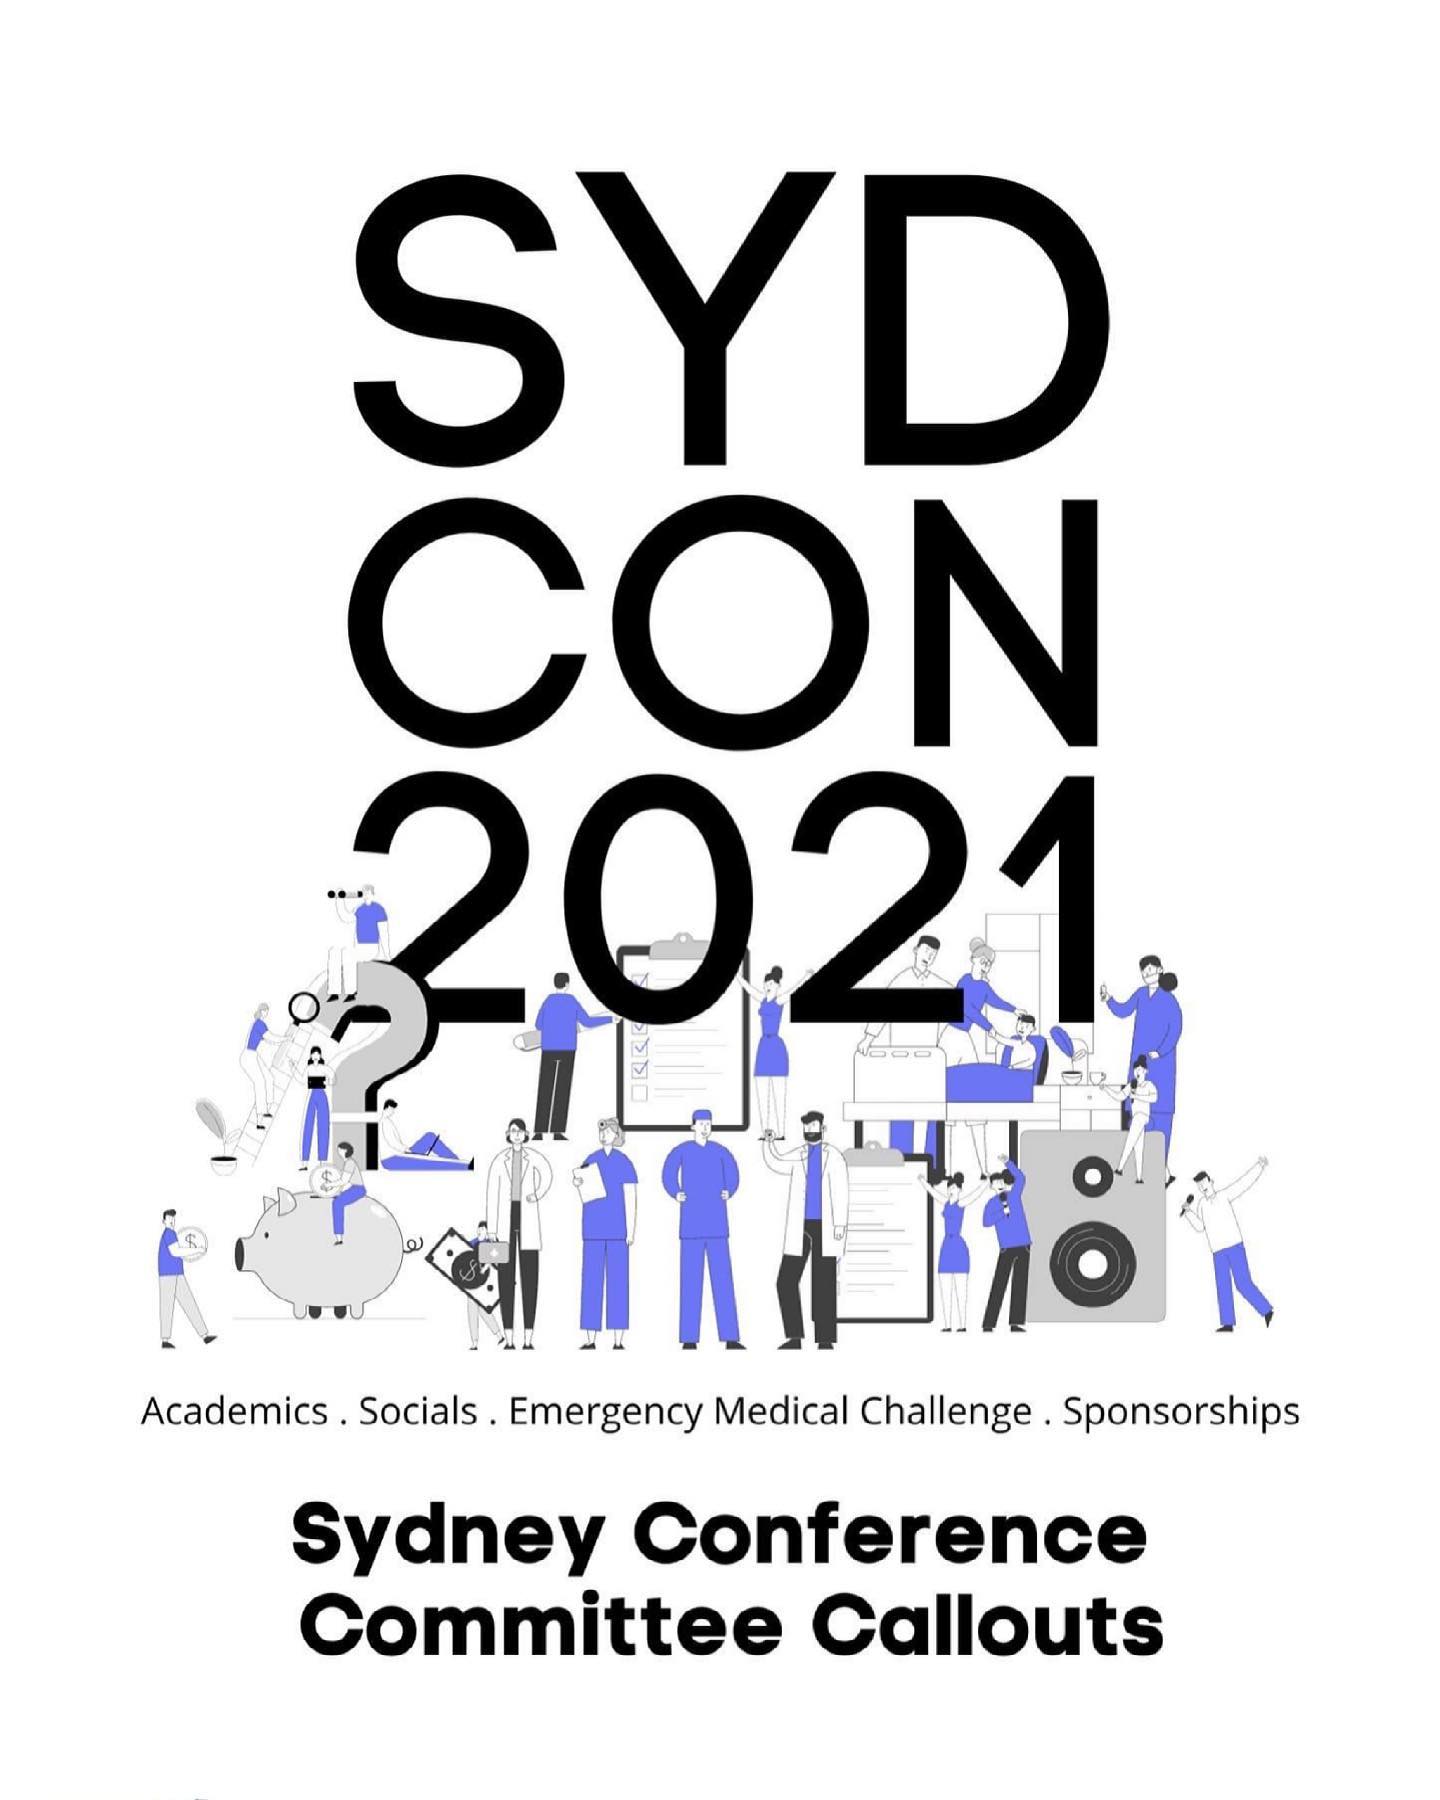 From the team that brought you the NSW Medical Students' Yacht Party, NSWMSC is proud to announce its premier event: 

The SYDNEY CONFERENCE

Combining an epic academic and social program over a huge weekend in September, this event NEEDS YOU, with positions available for:

- Academics Convenor 
- Socials Convenor
- Emergency Medical Challenge Convenor
- Sponsorship Convenor

Application form is available here: http://www.nswmsc.org.au/sydcon2021.html

We look forward to welcoming you to the team!